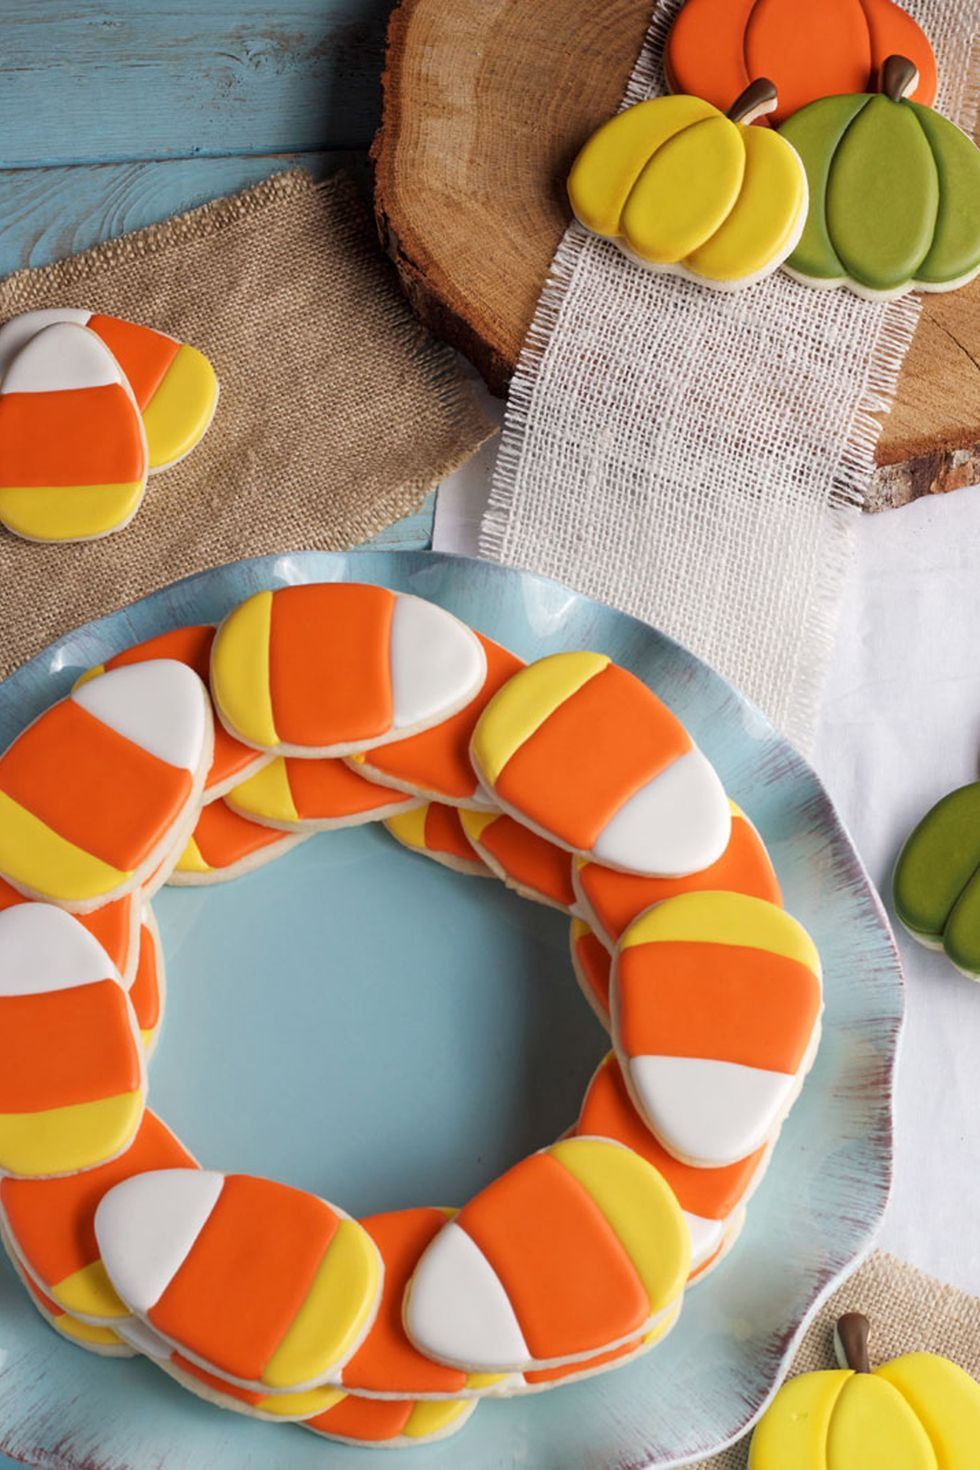 41 Halloween Cookies for a Wickedly Delicious Treat -   19 candy corn cookies ideas